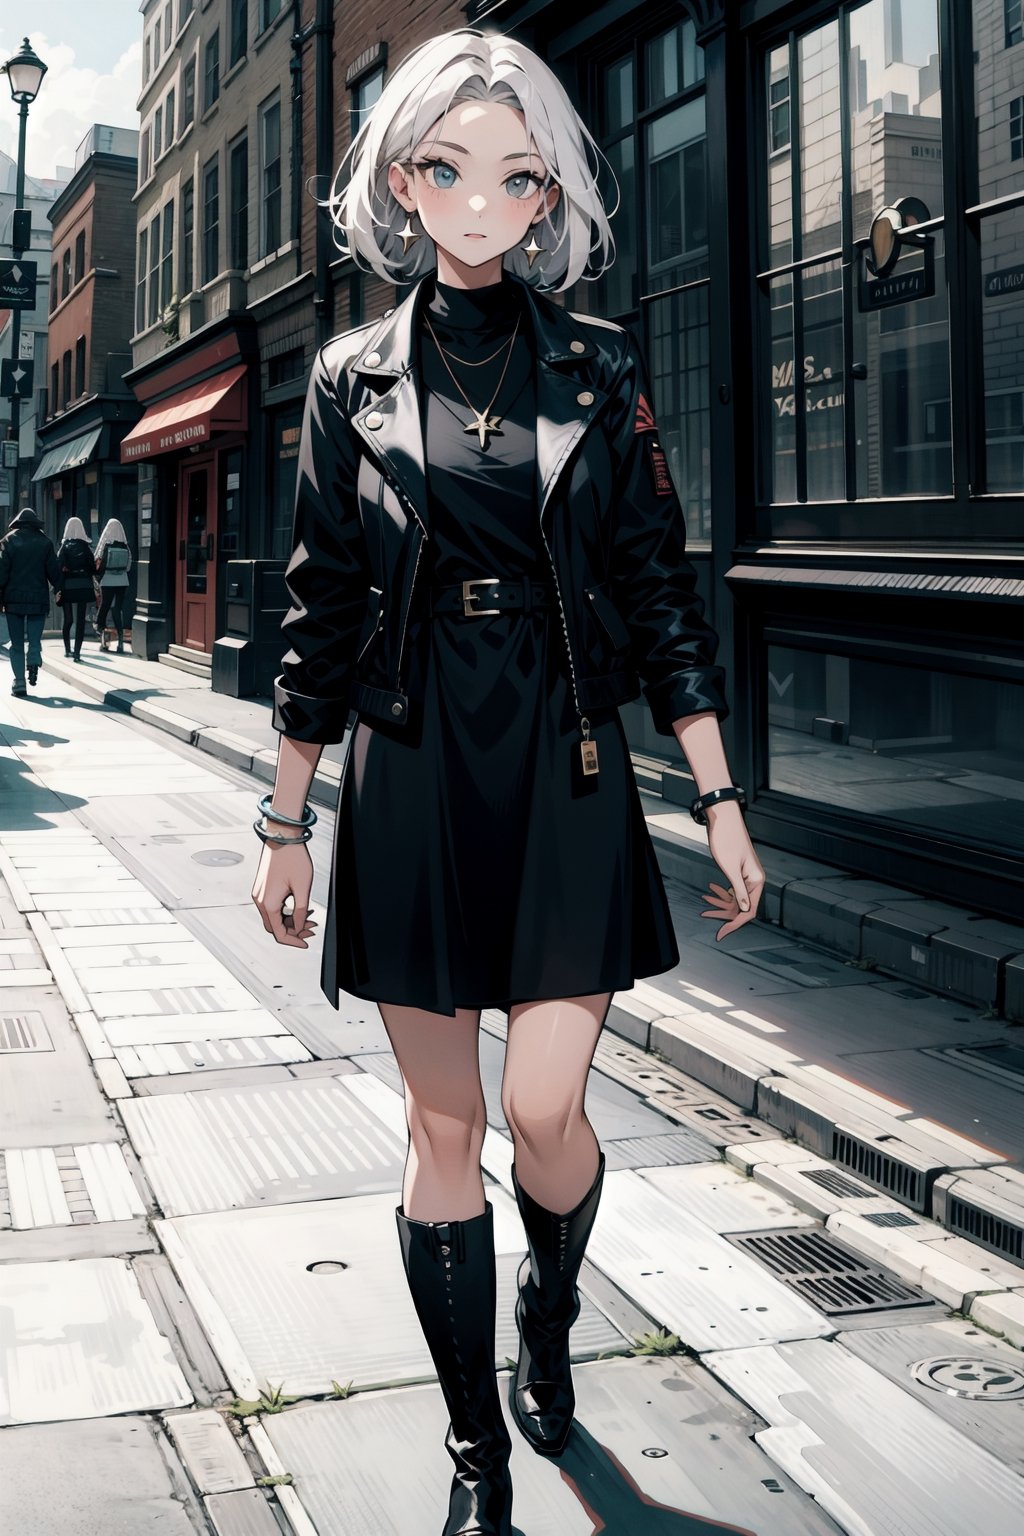 masterpiece, ultra high res, absurdres,
A young woman in London is walking down the street, dressed in a trendy fashion style. She has short, straight hair and a natural makeup. She wears a black knit dress, a black leather jacket, and boots. She also wears small earrings and a simple necklace and bracelet. She is adding a touch of individuality to the street,
looking at viewer,
dutch angle, 